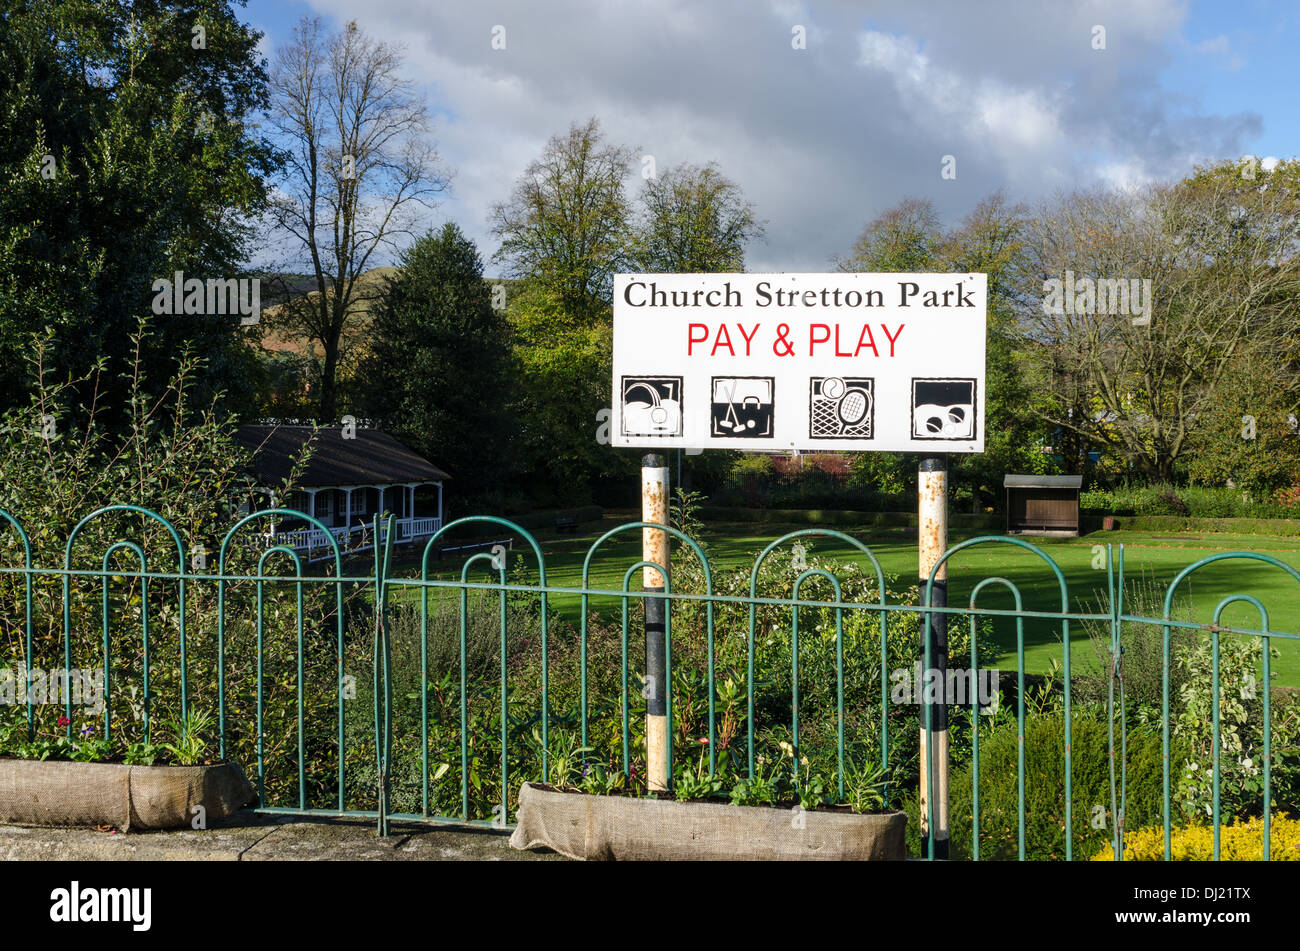 Sign for Church Stretton Park Pay and Play leisure activities Stock Photo